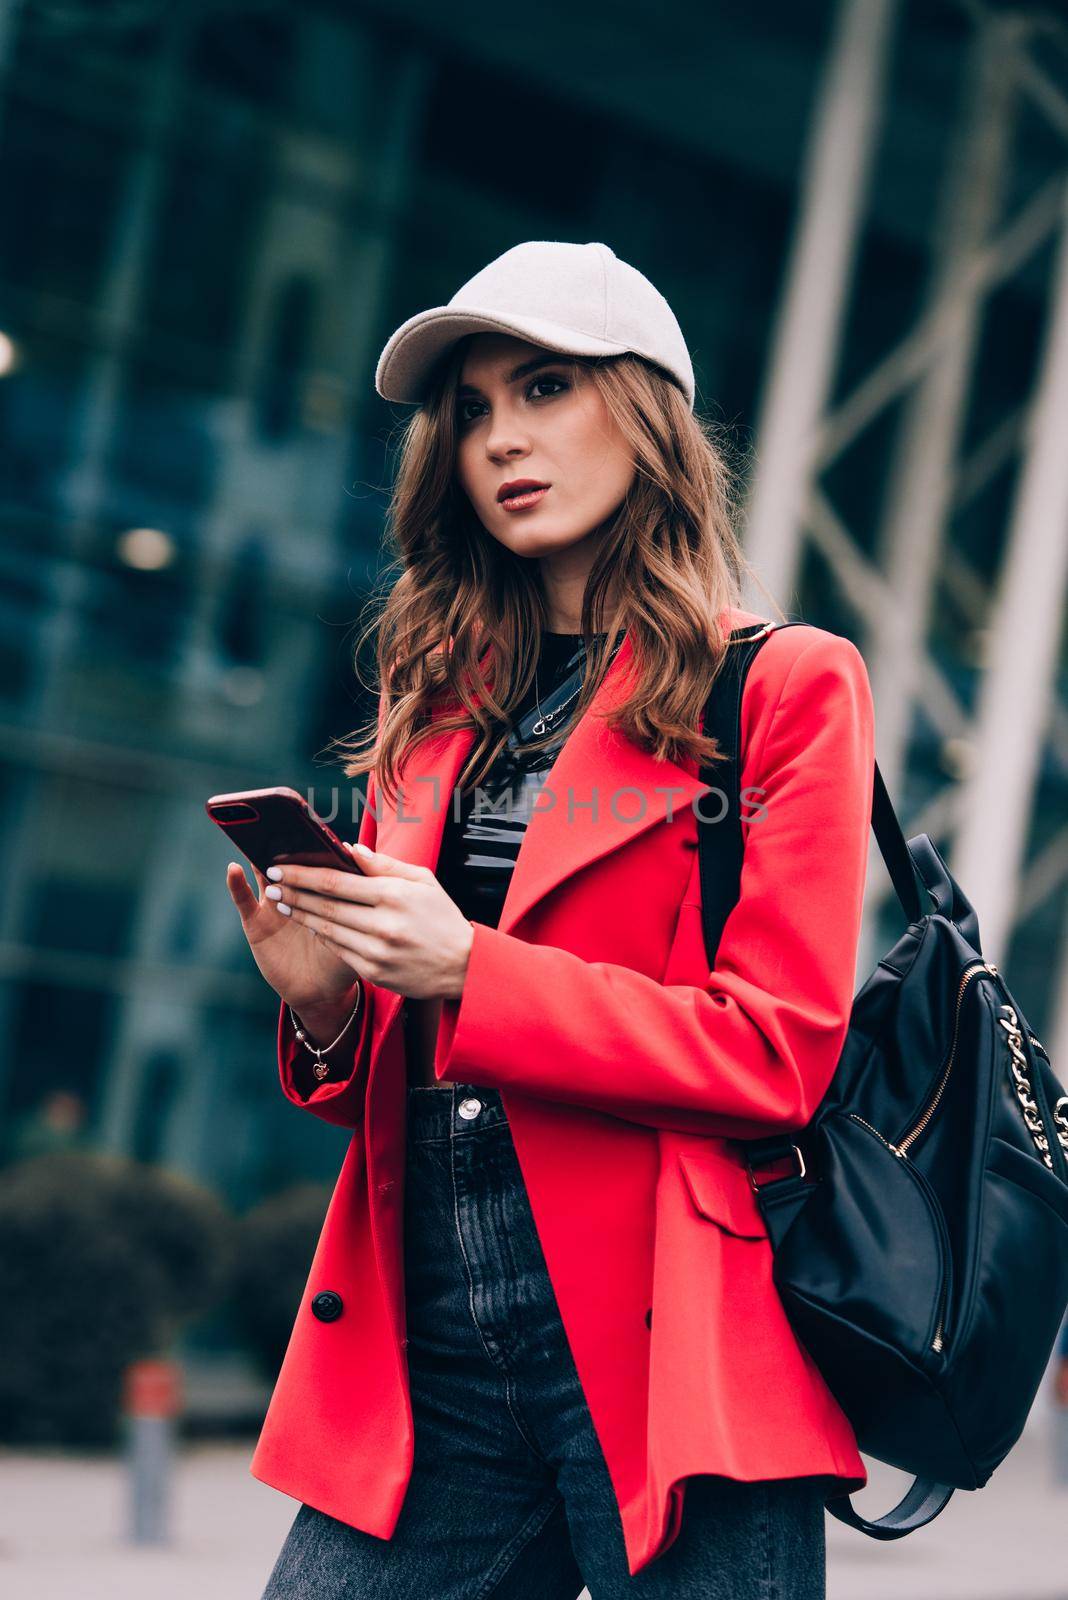 Stylish woman on the street uses a mobile phone. online shopping. use of mobile applications. beautiful woman with long dark hair in a red jacket, black top and a cap